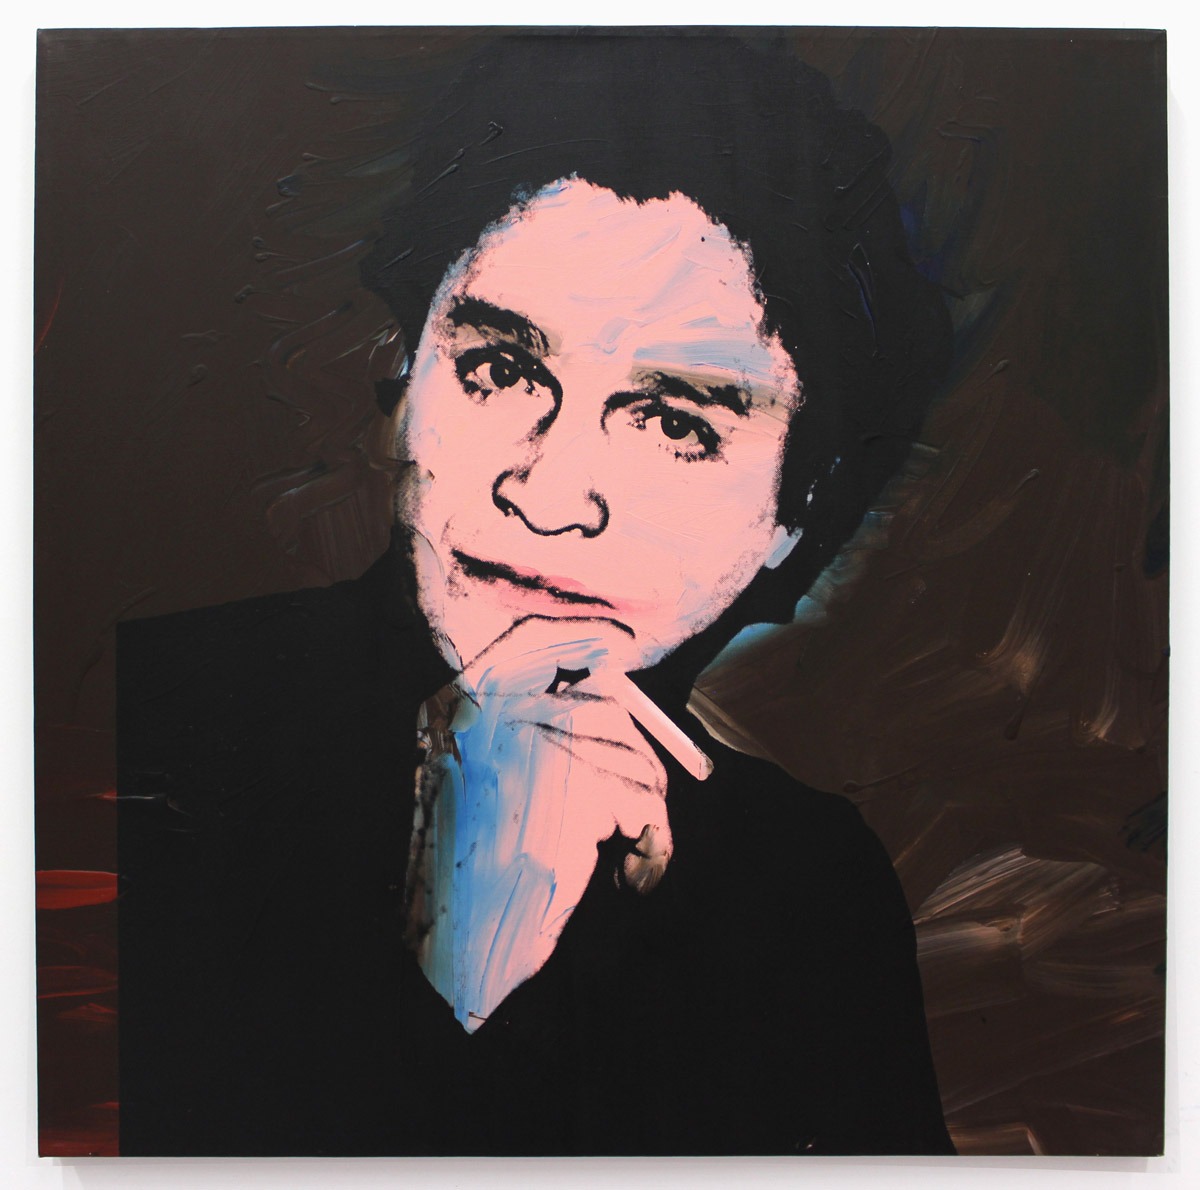 Painting of Alexander Iolas on canvas by Andy Warhol